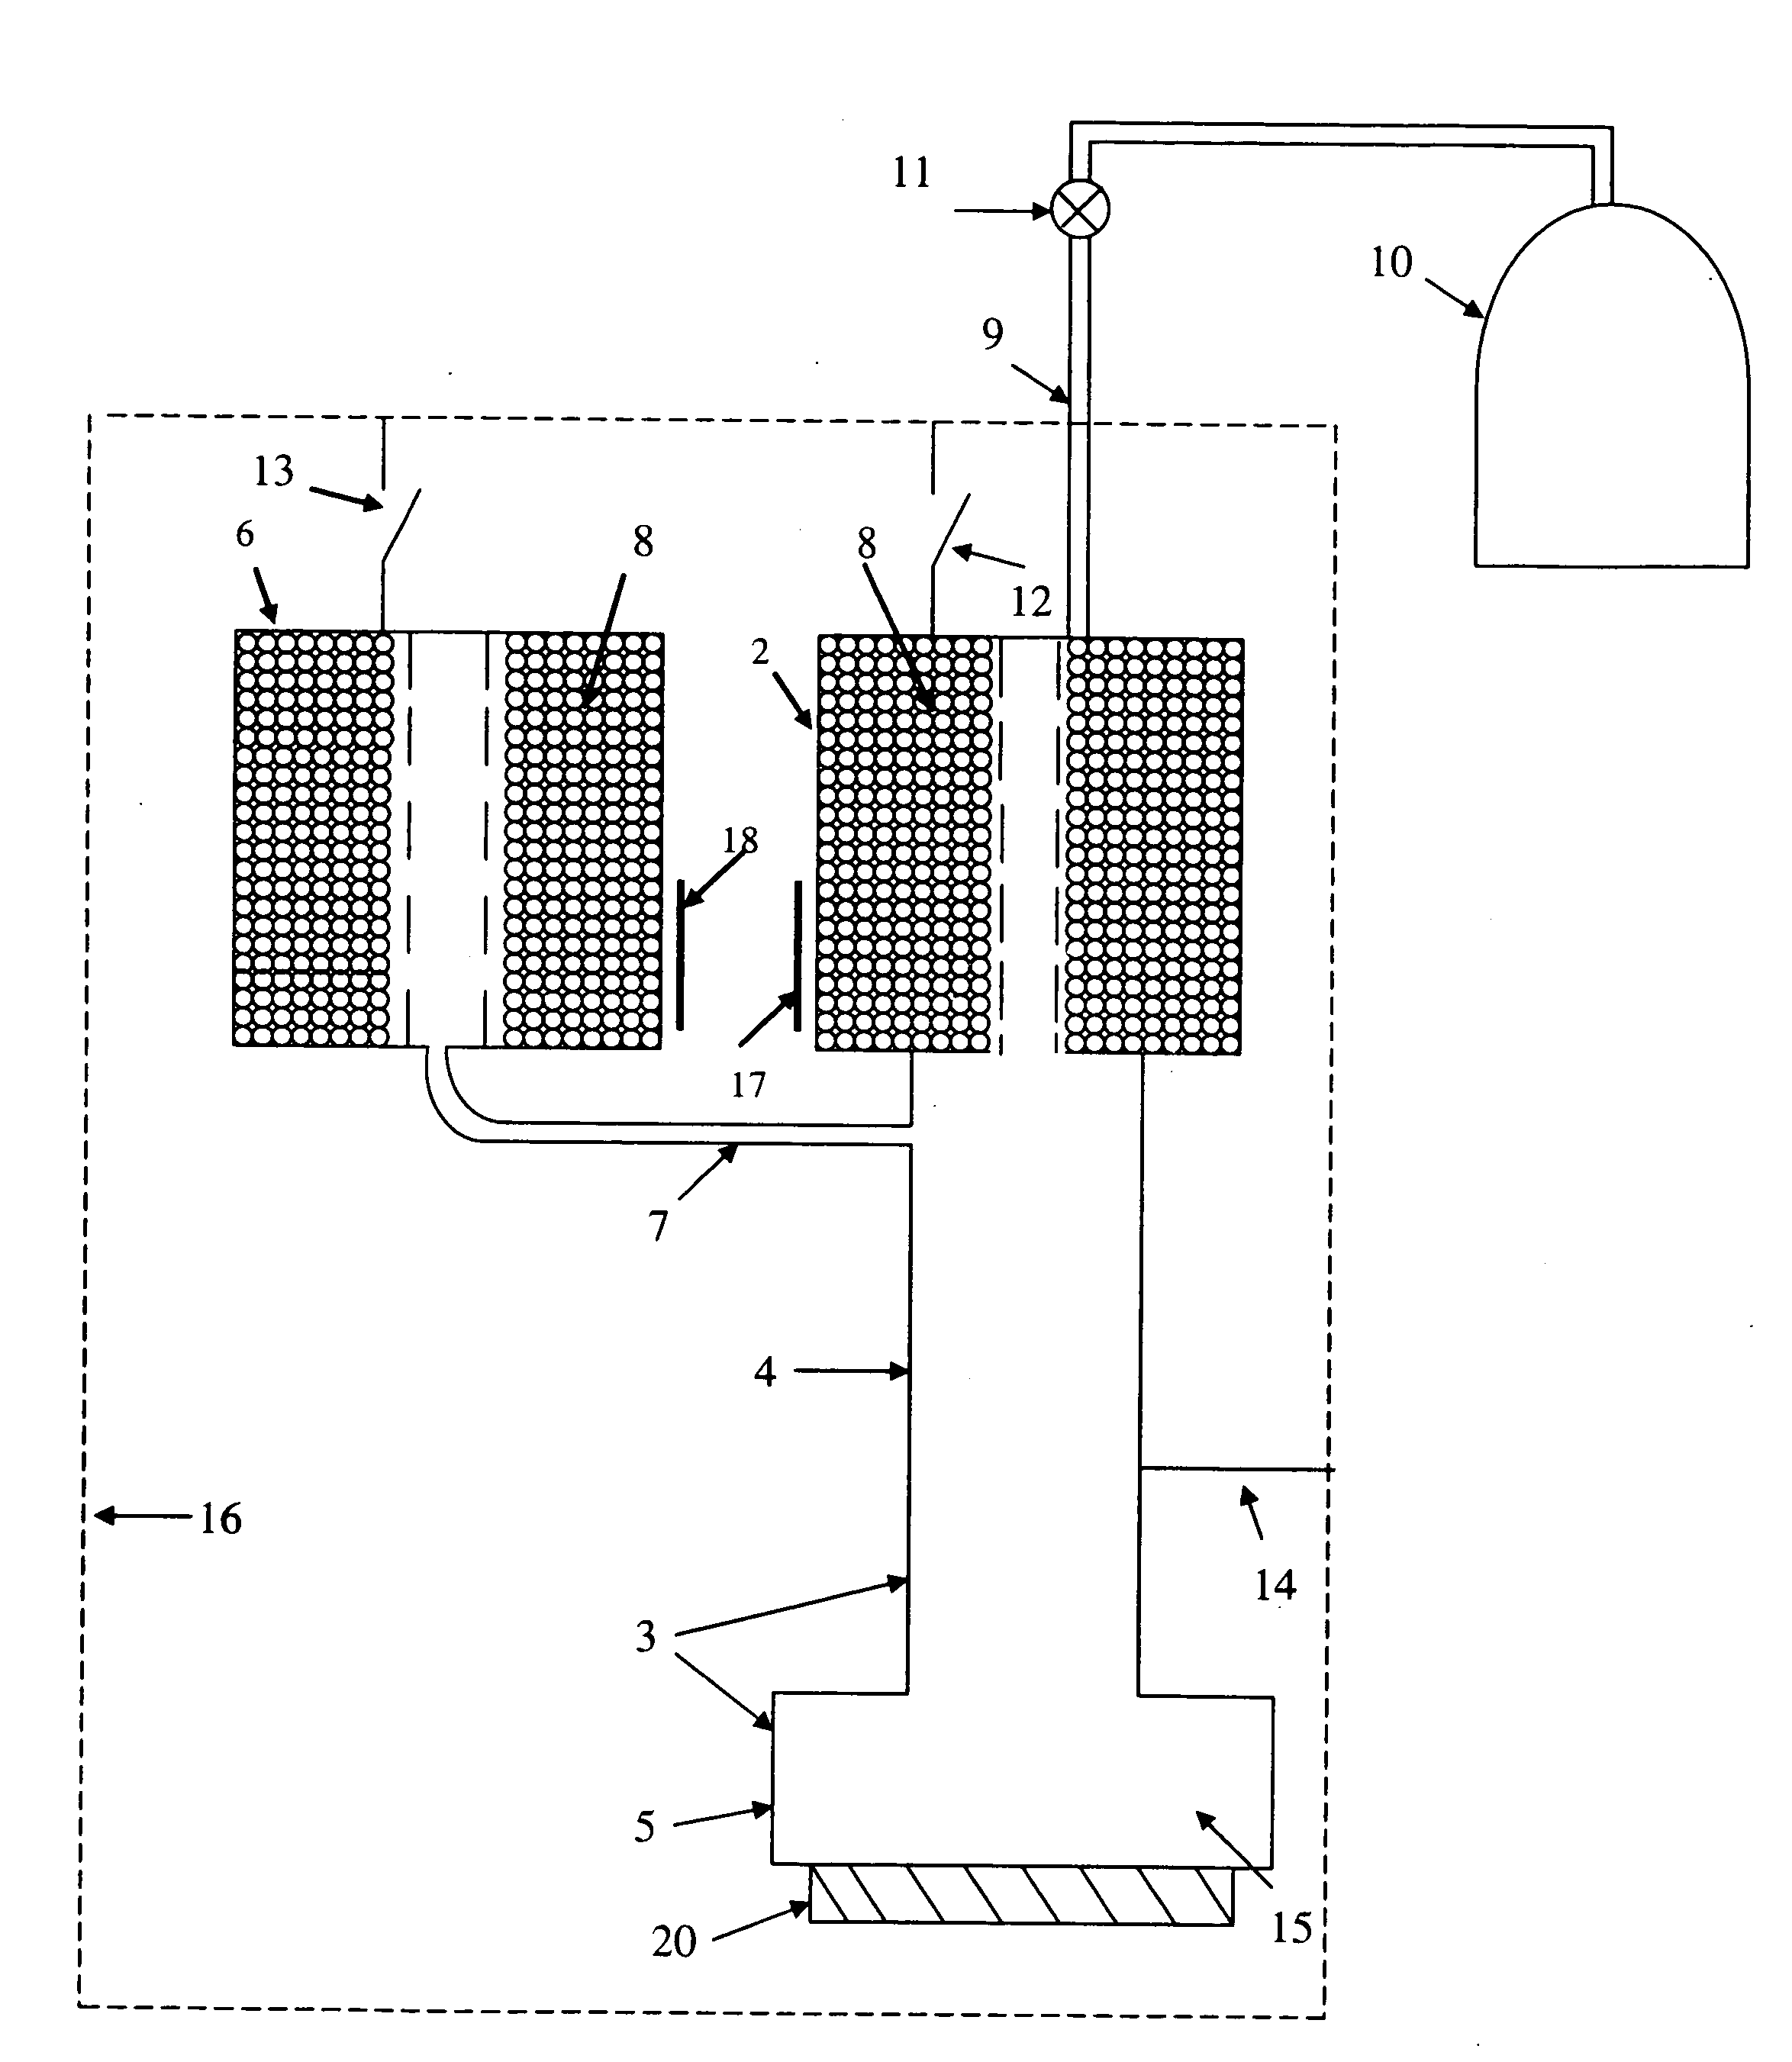 Method of operating an adsorption refrigeration system